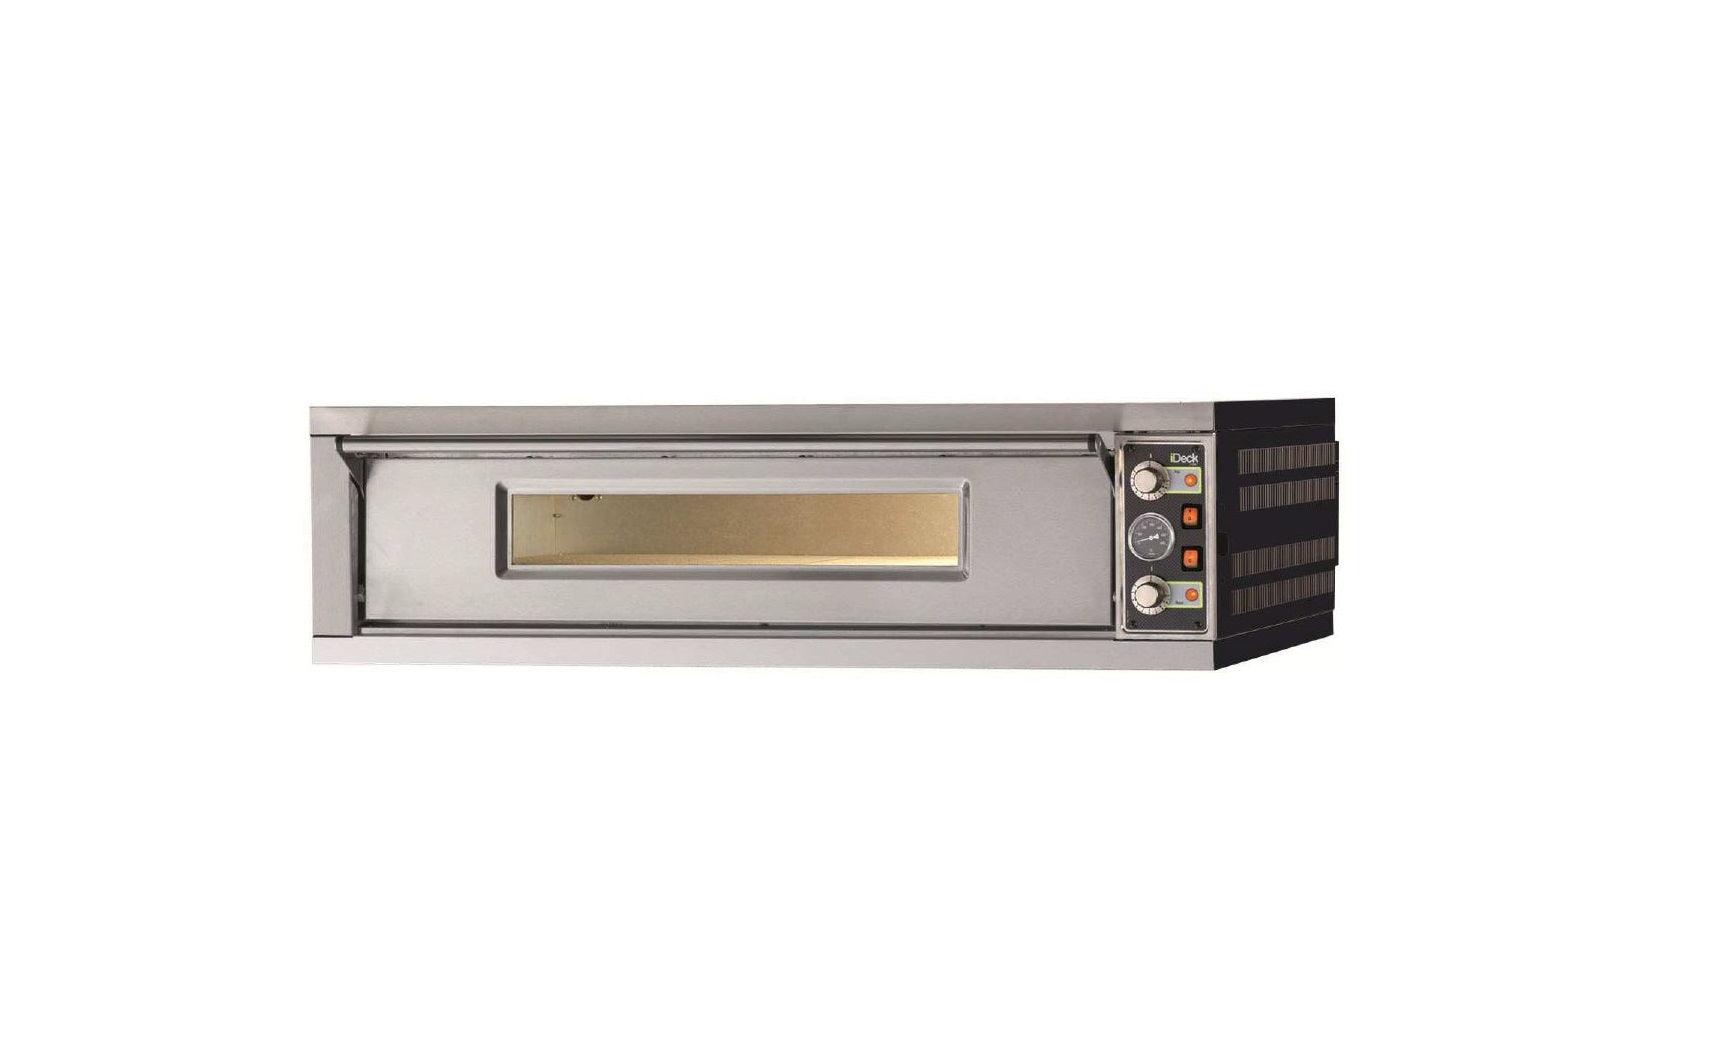 PM 105.65 iDeck Manual Control Electric Pizza Oven 105 x 65 cm chamber. 1 Deck - AMPTO